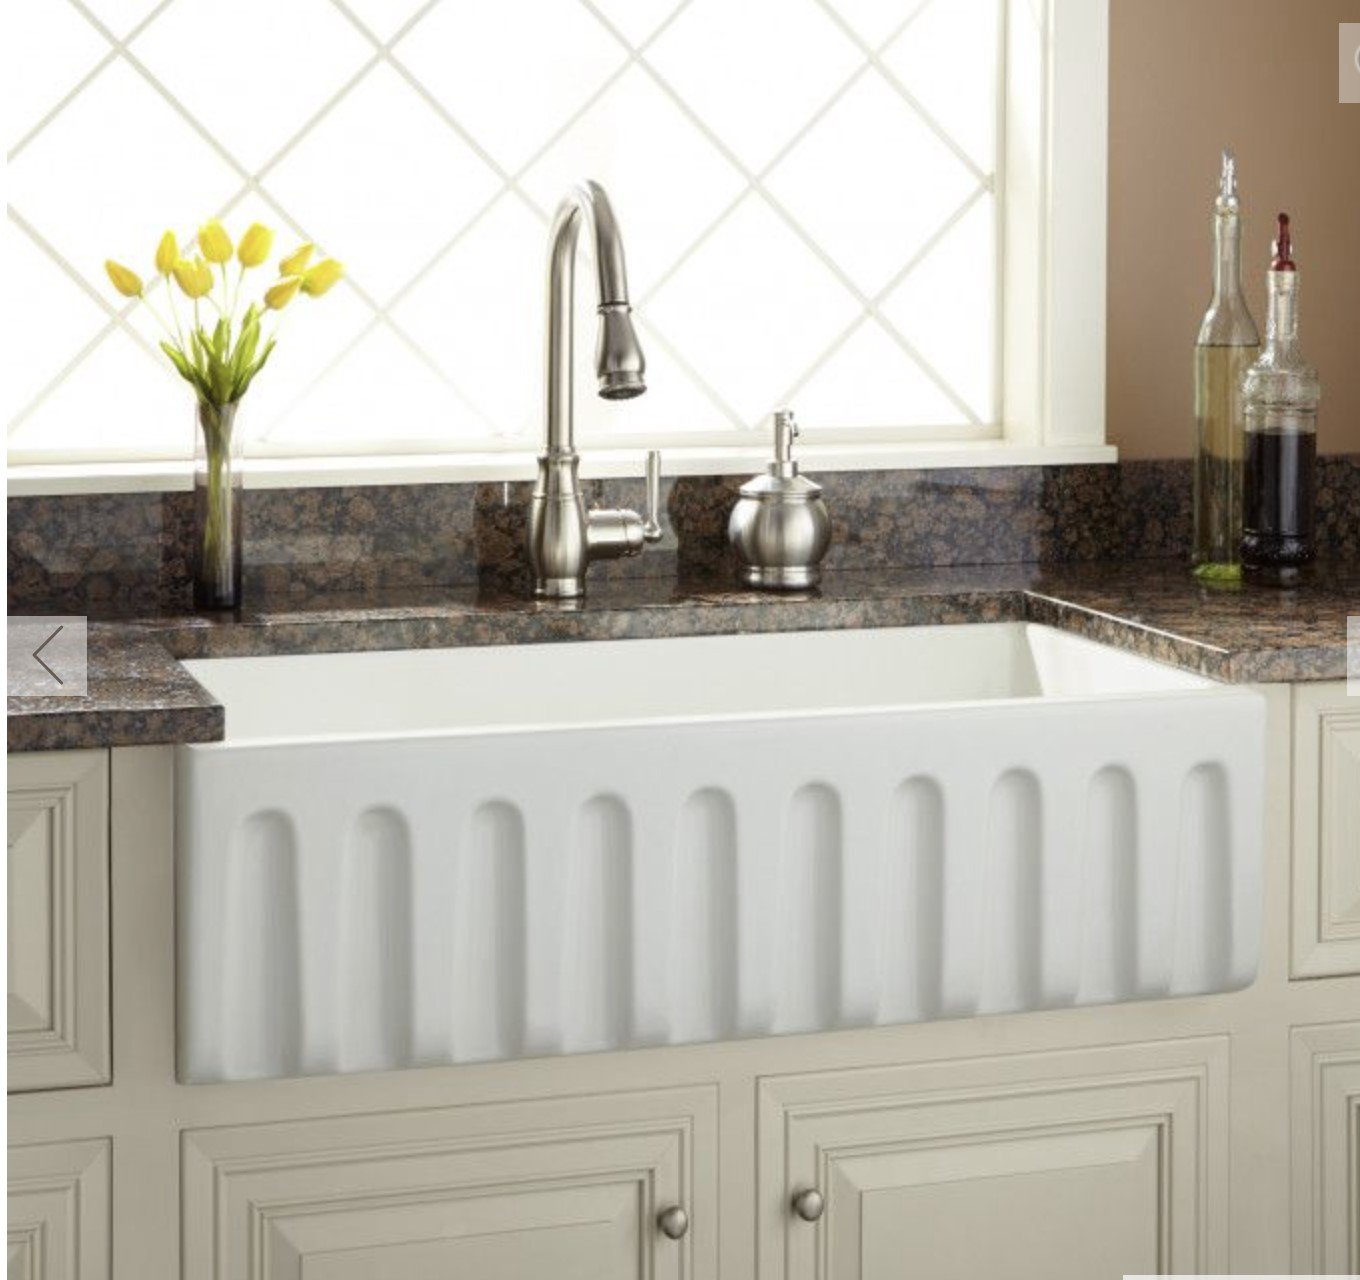 Cast Iron vs Fireclay Sinks – What You Should Know